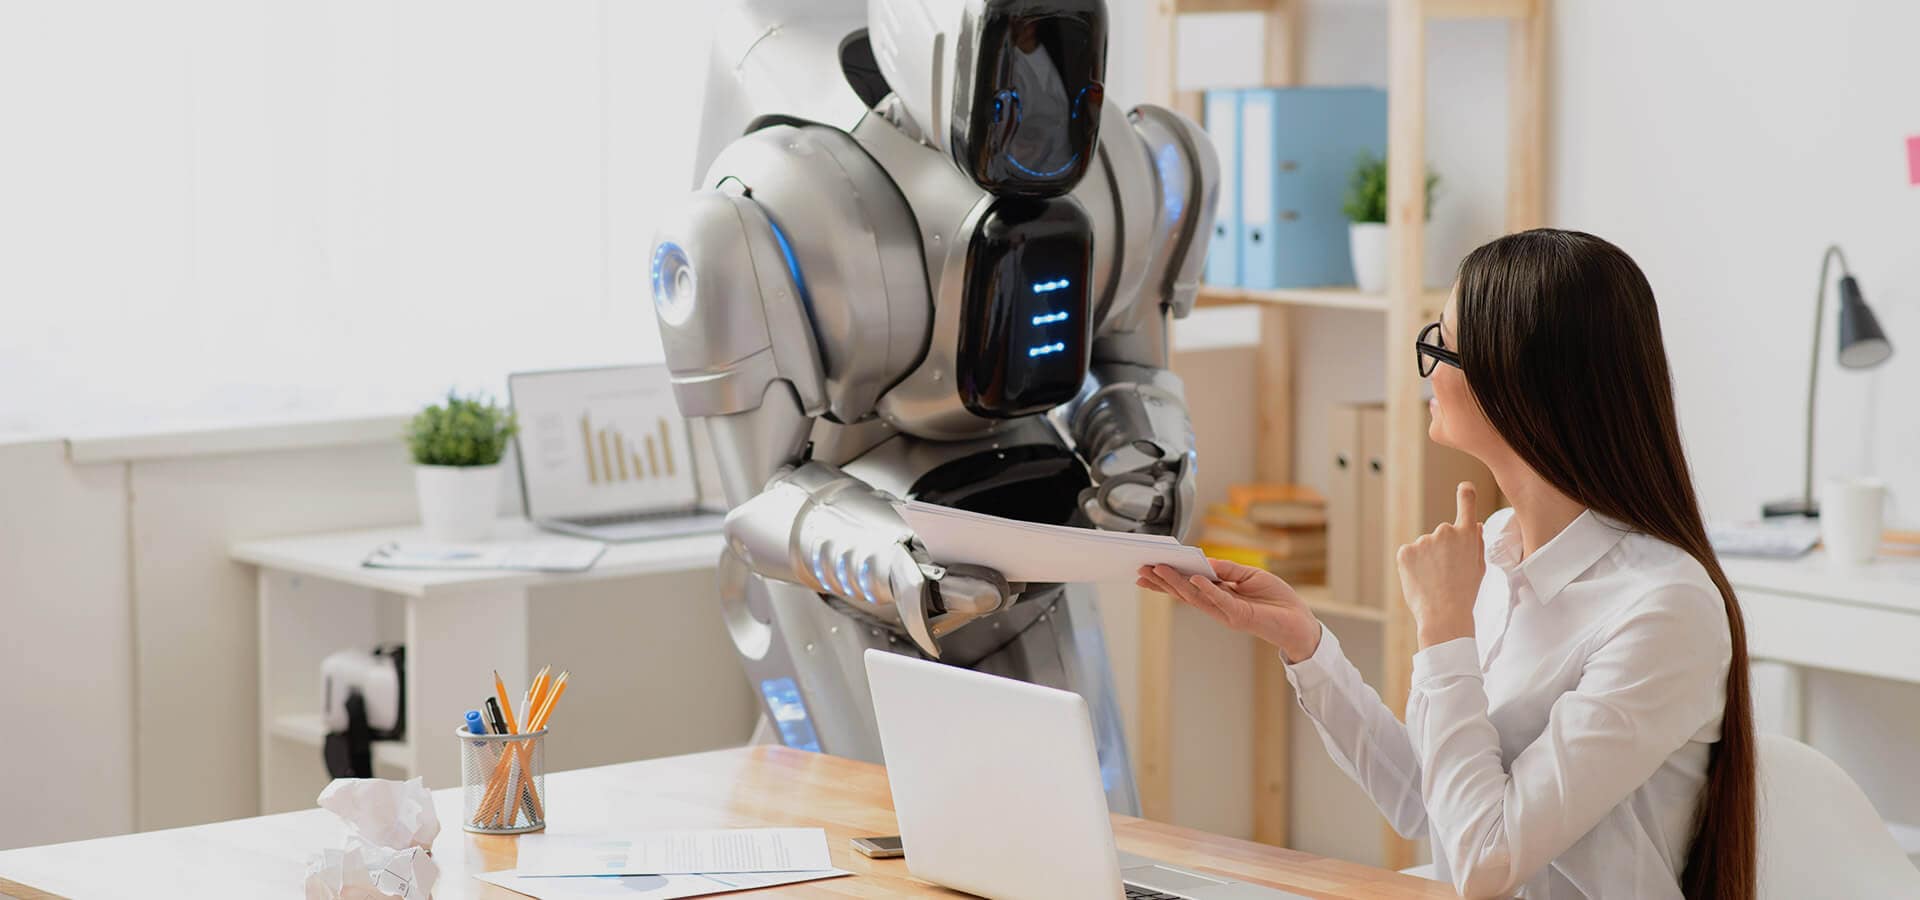 Robot and I: Future of the Workforce